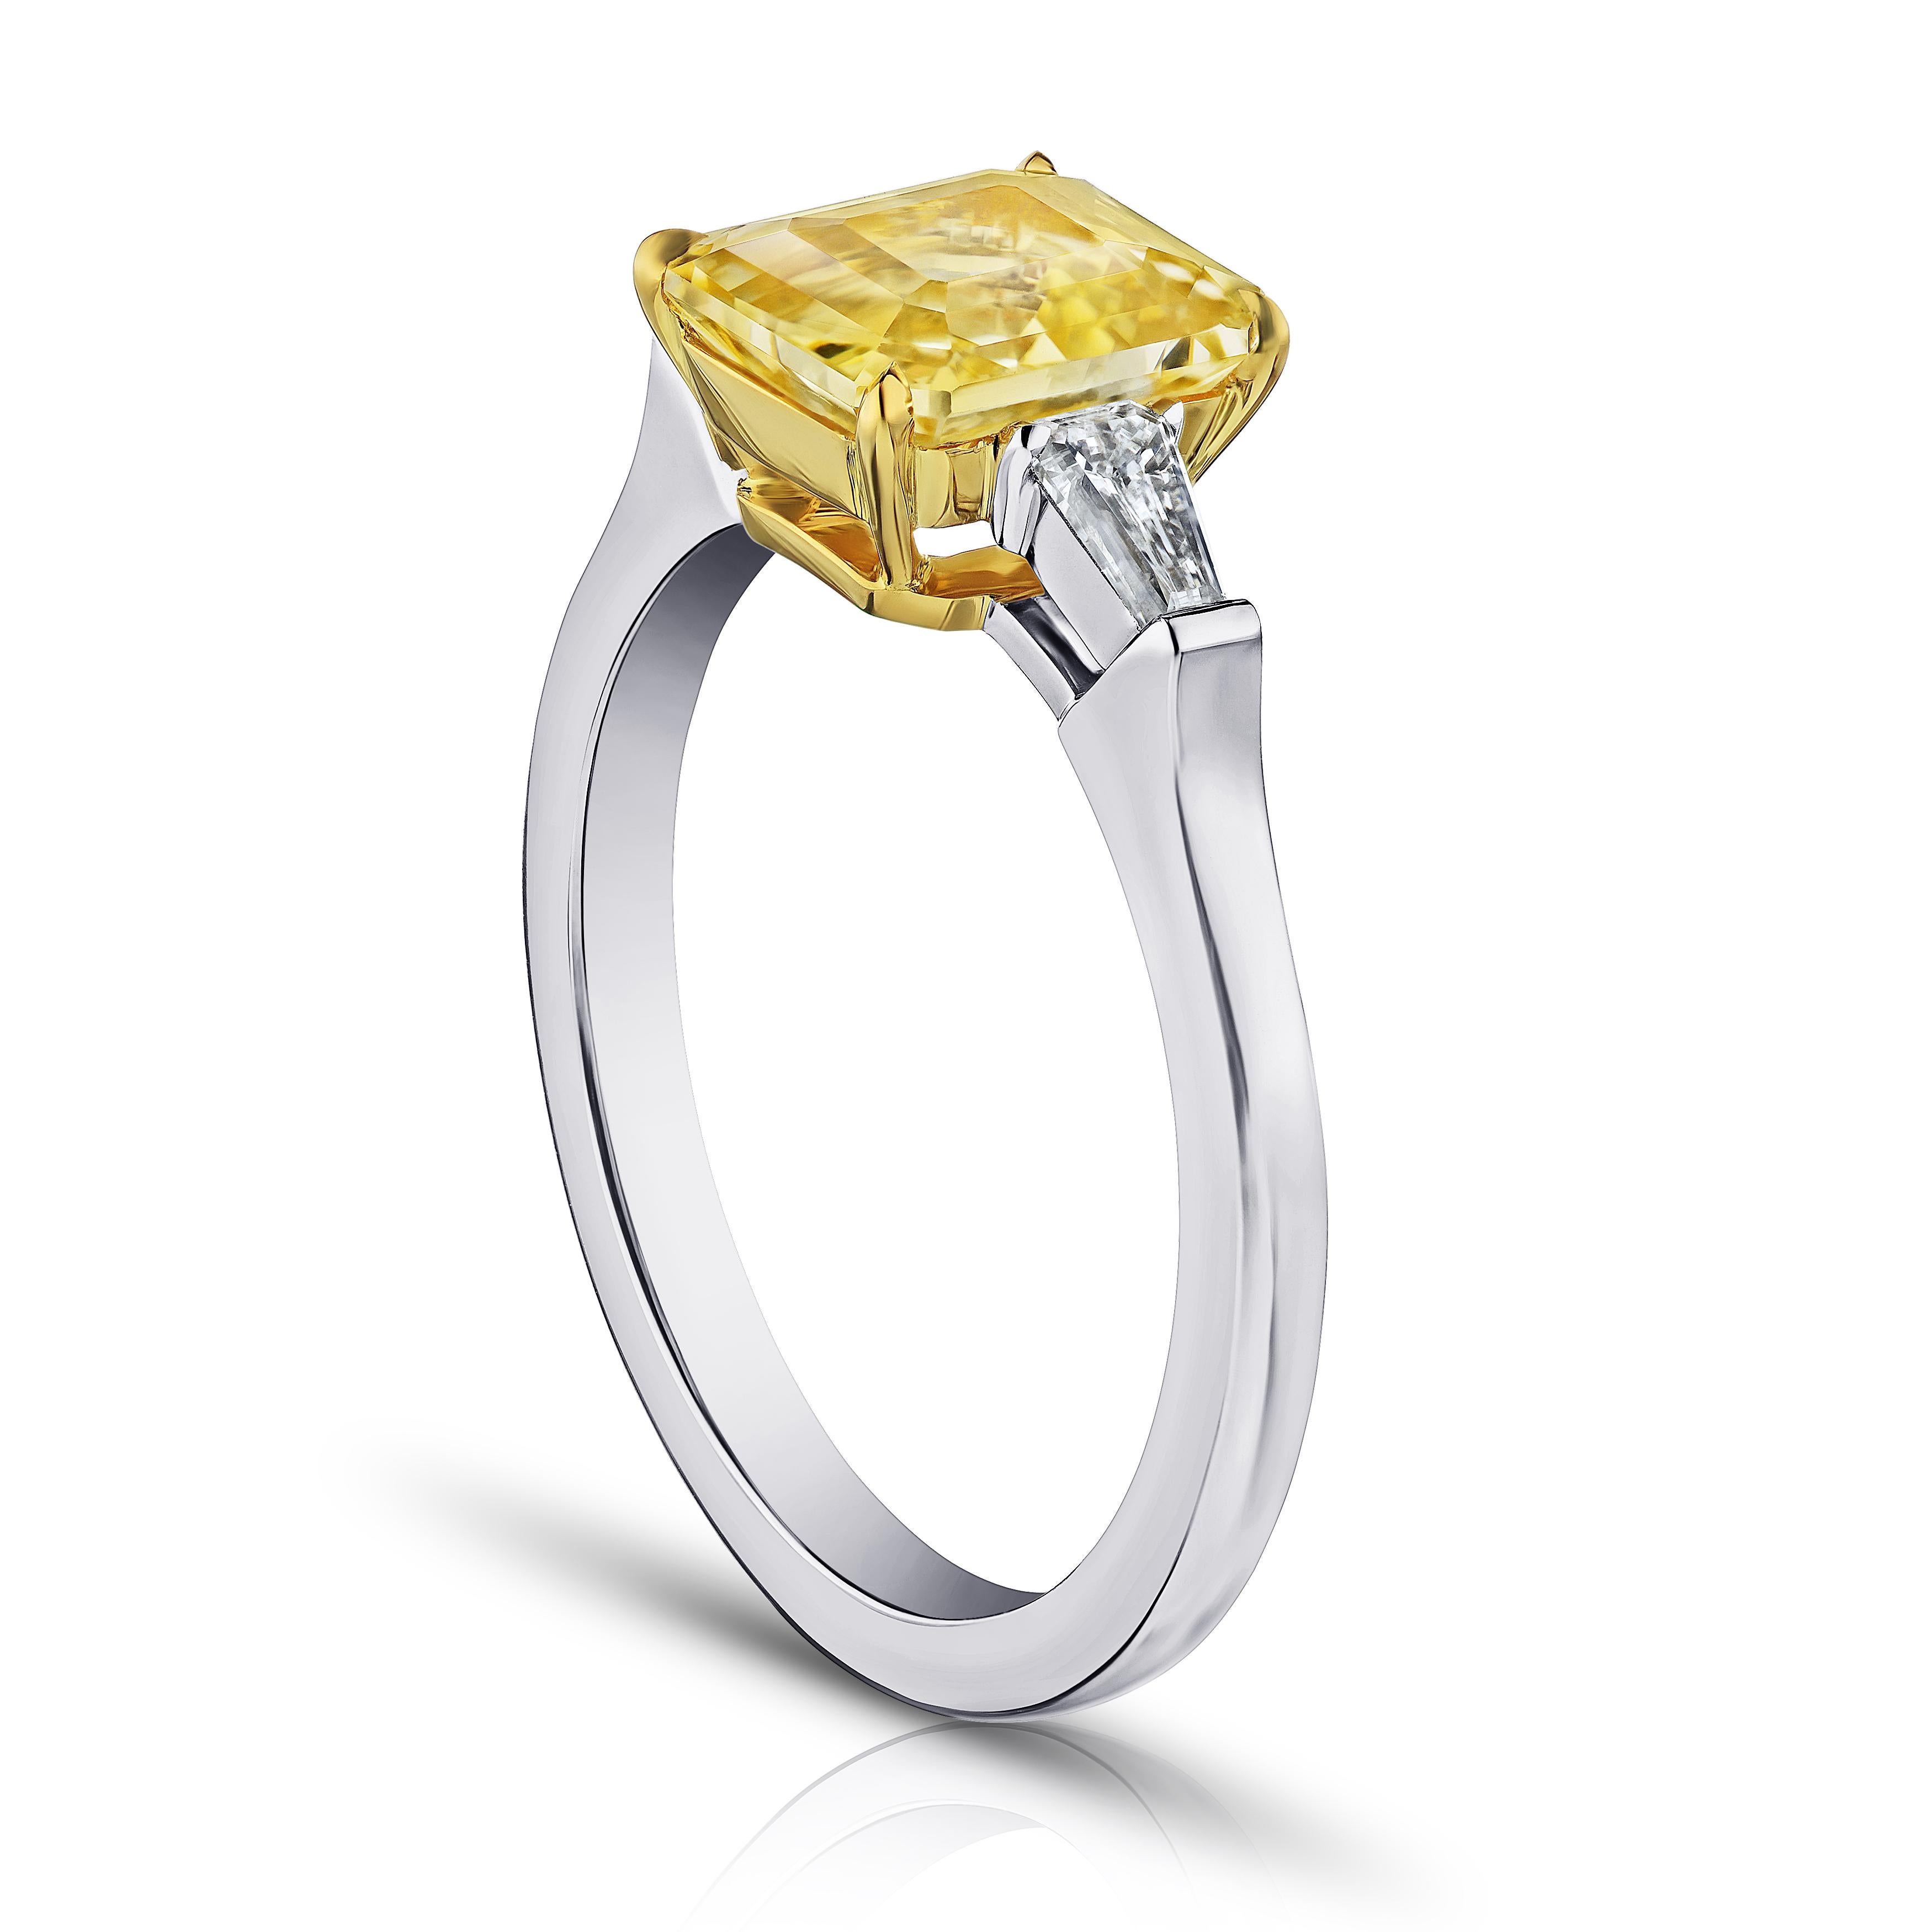 2.52 carat emerald cut yellow sapphire with tapered emerald cut diamonds .27 carats set in a platinum with 18k yellow gold ring. This ring is currently a size 7.  We will resize to your finger size without charge.